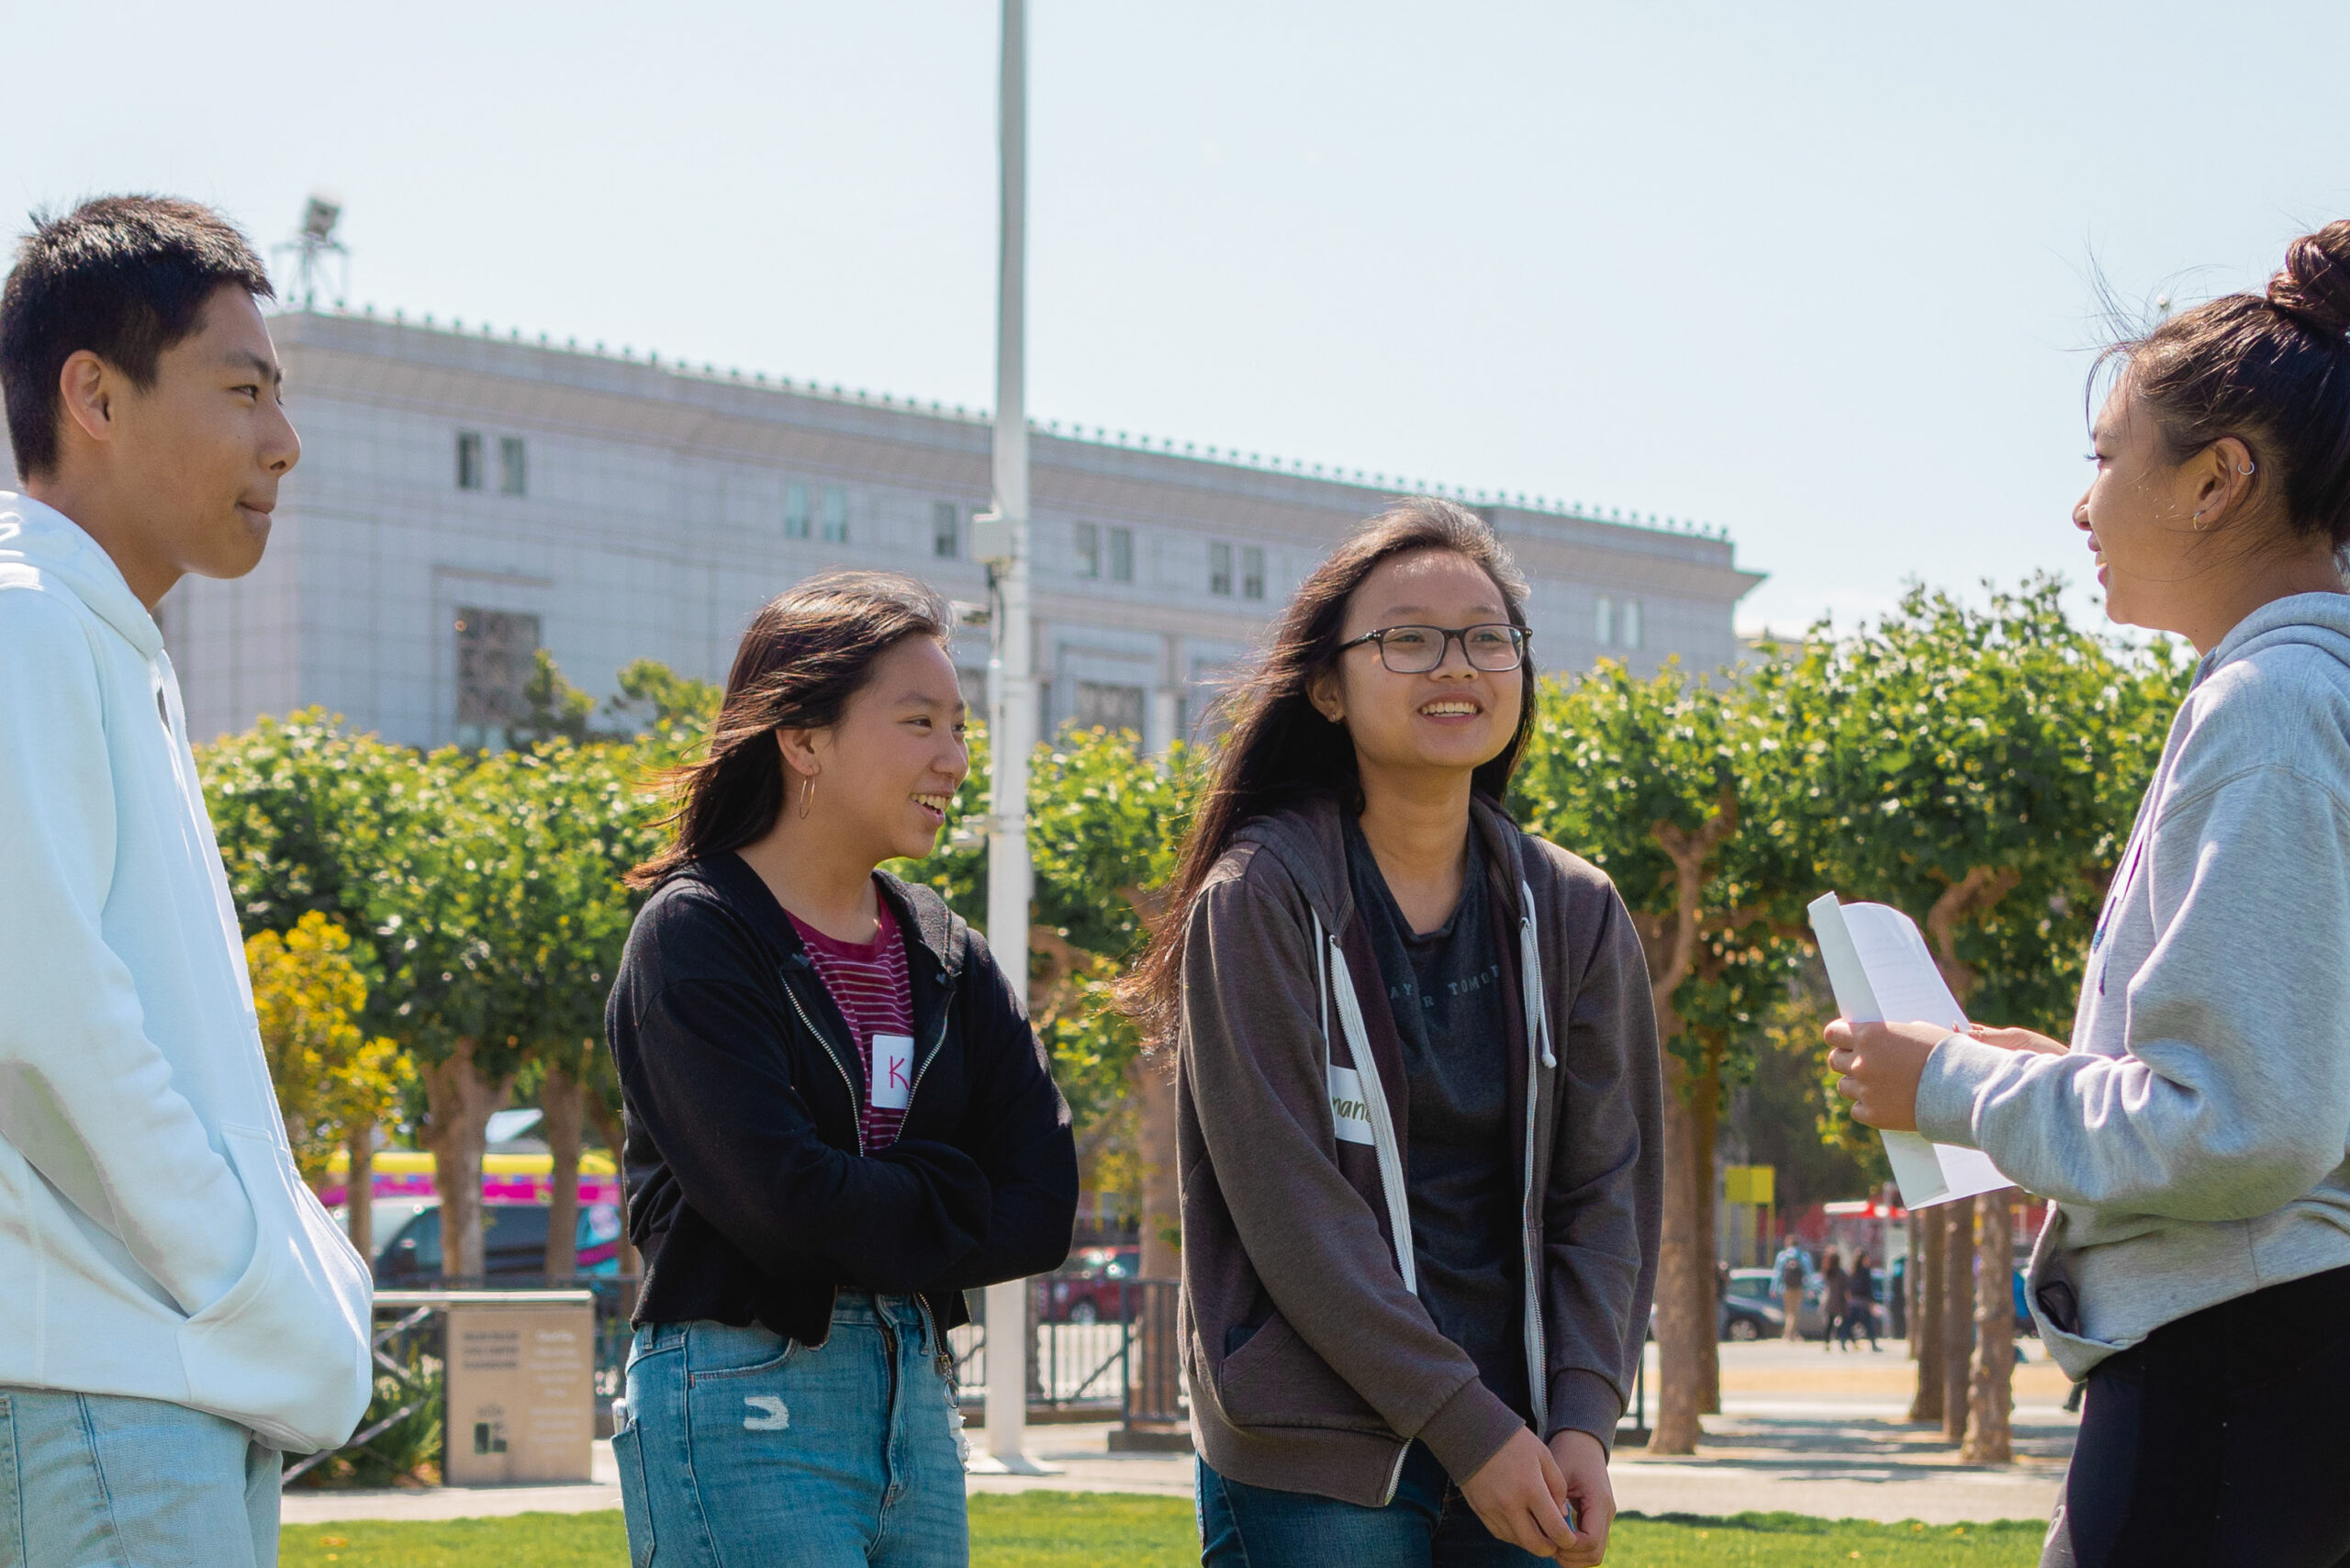 Four AAMPLIFY students discuss how to proceed with a project at Civic Center Plaza, San Francisco.